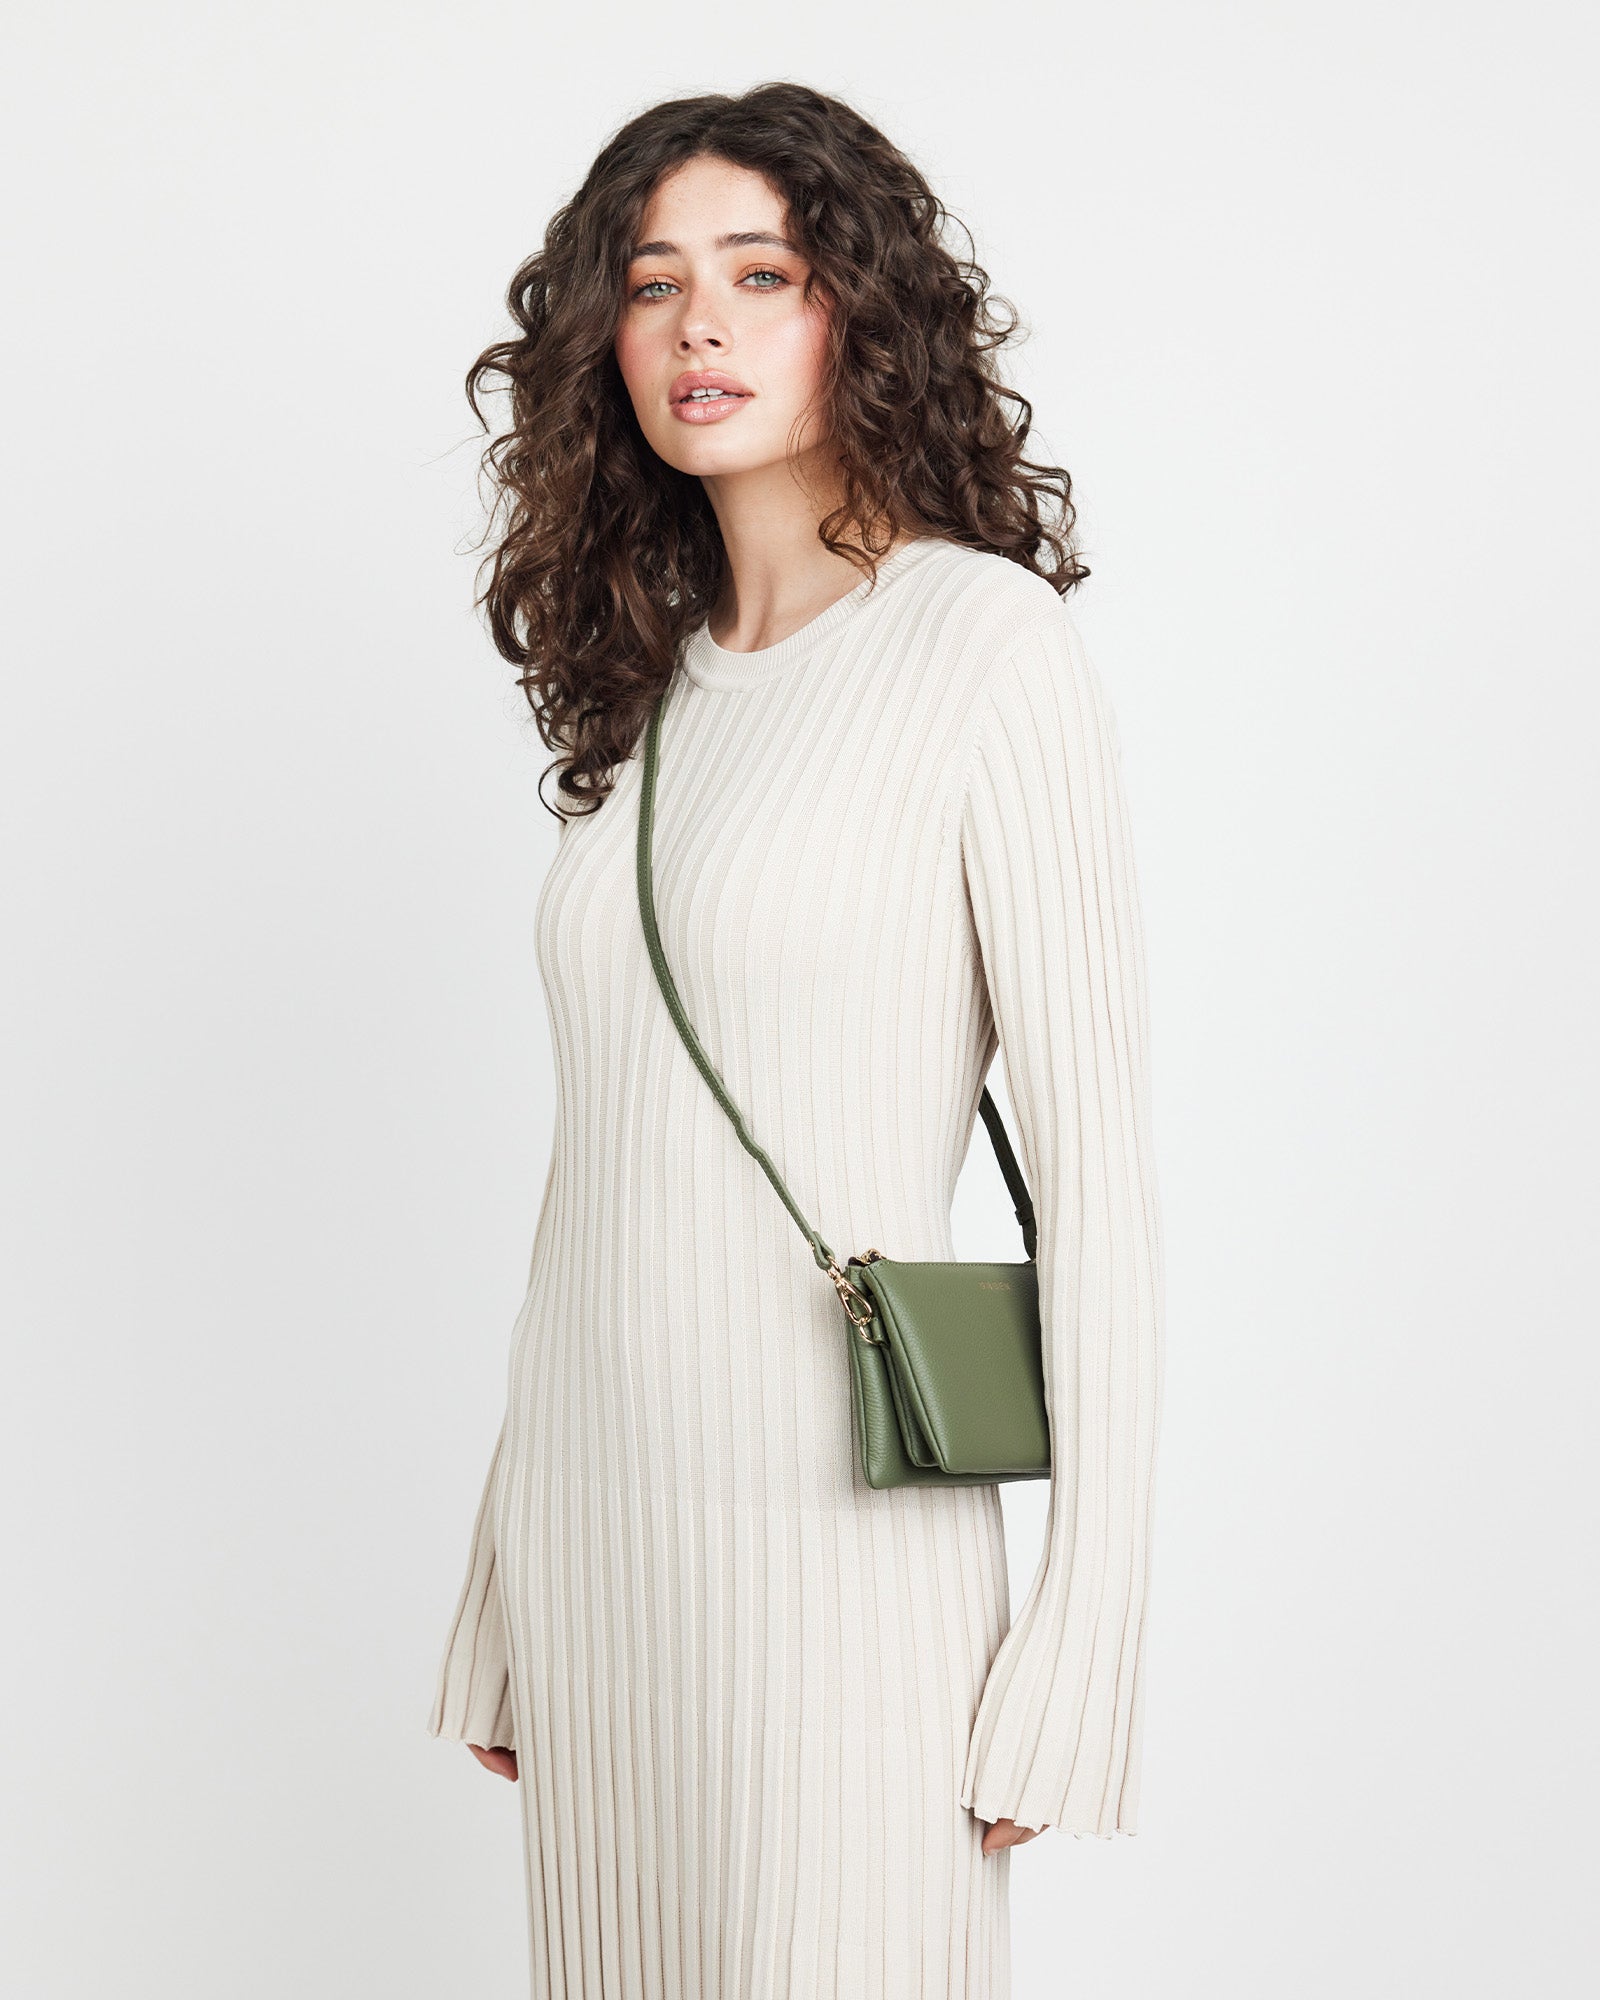 Tilly Crossbody | Wearable Wallet | Saben Handbags and Accessories